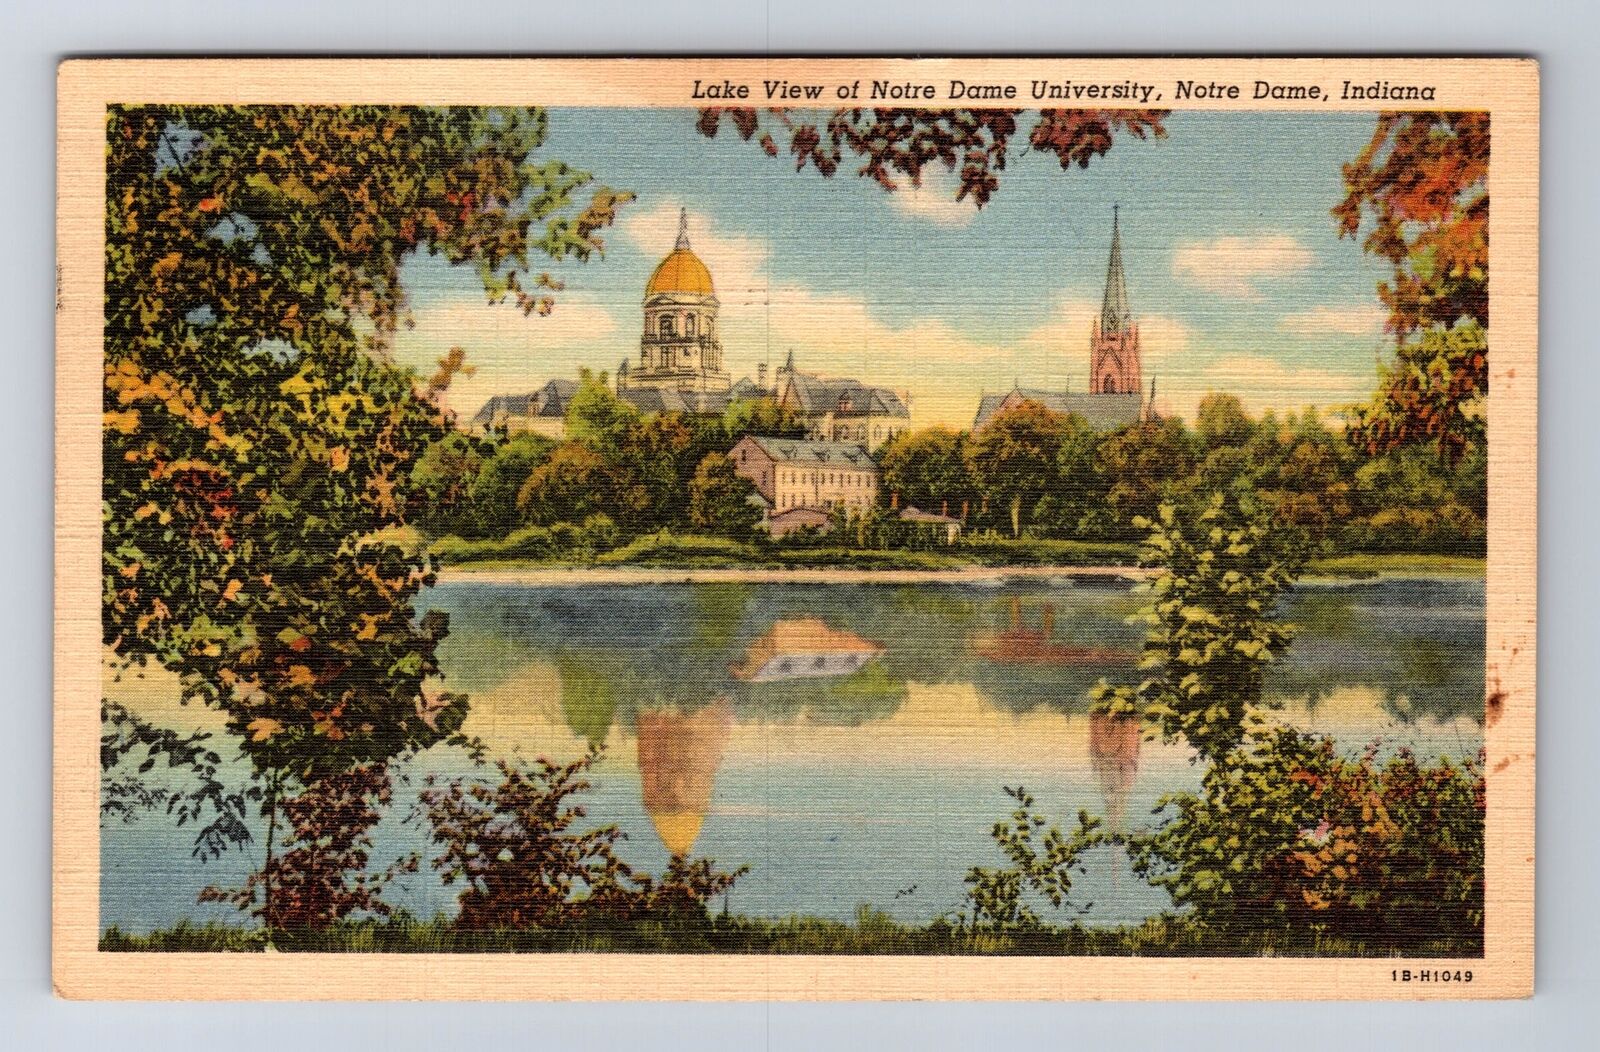 Notre Dame IN-Indiana, Lake View of Notre Dame University Vintage c1942 Postcard